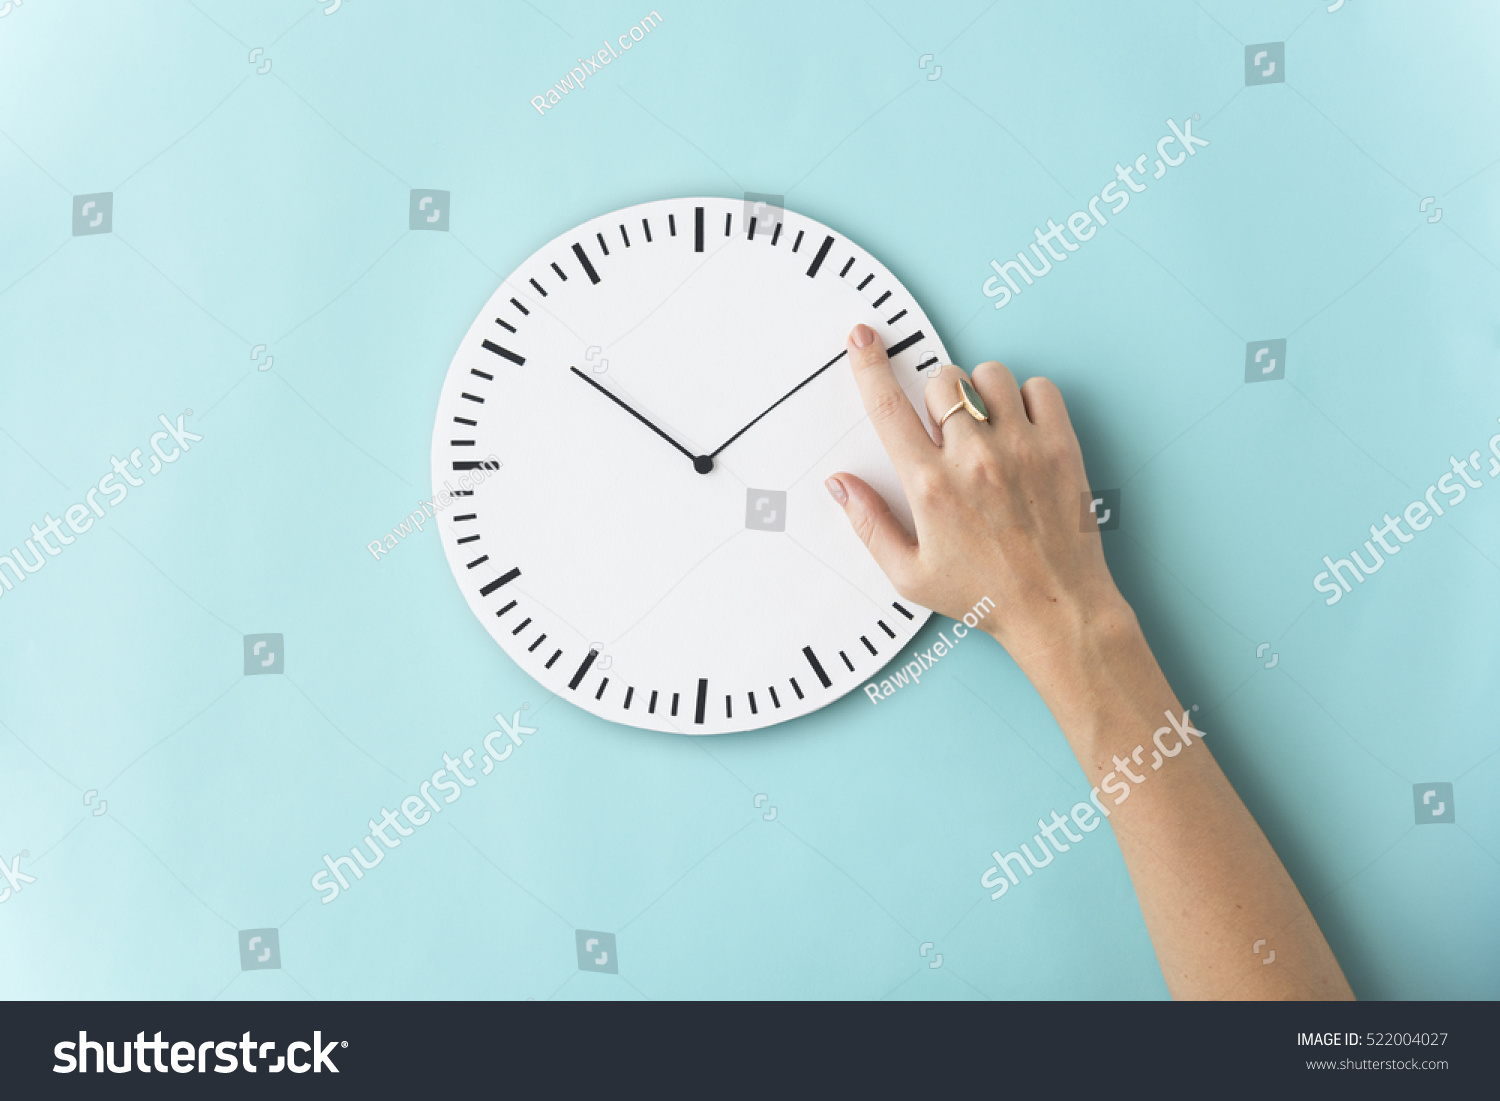 Time Punctual Second Minute Hour Concept #522004027